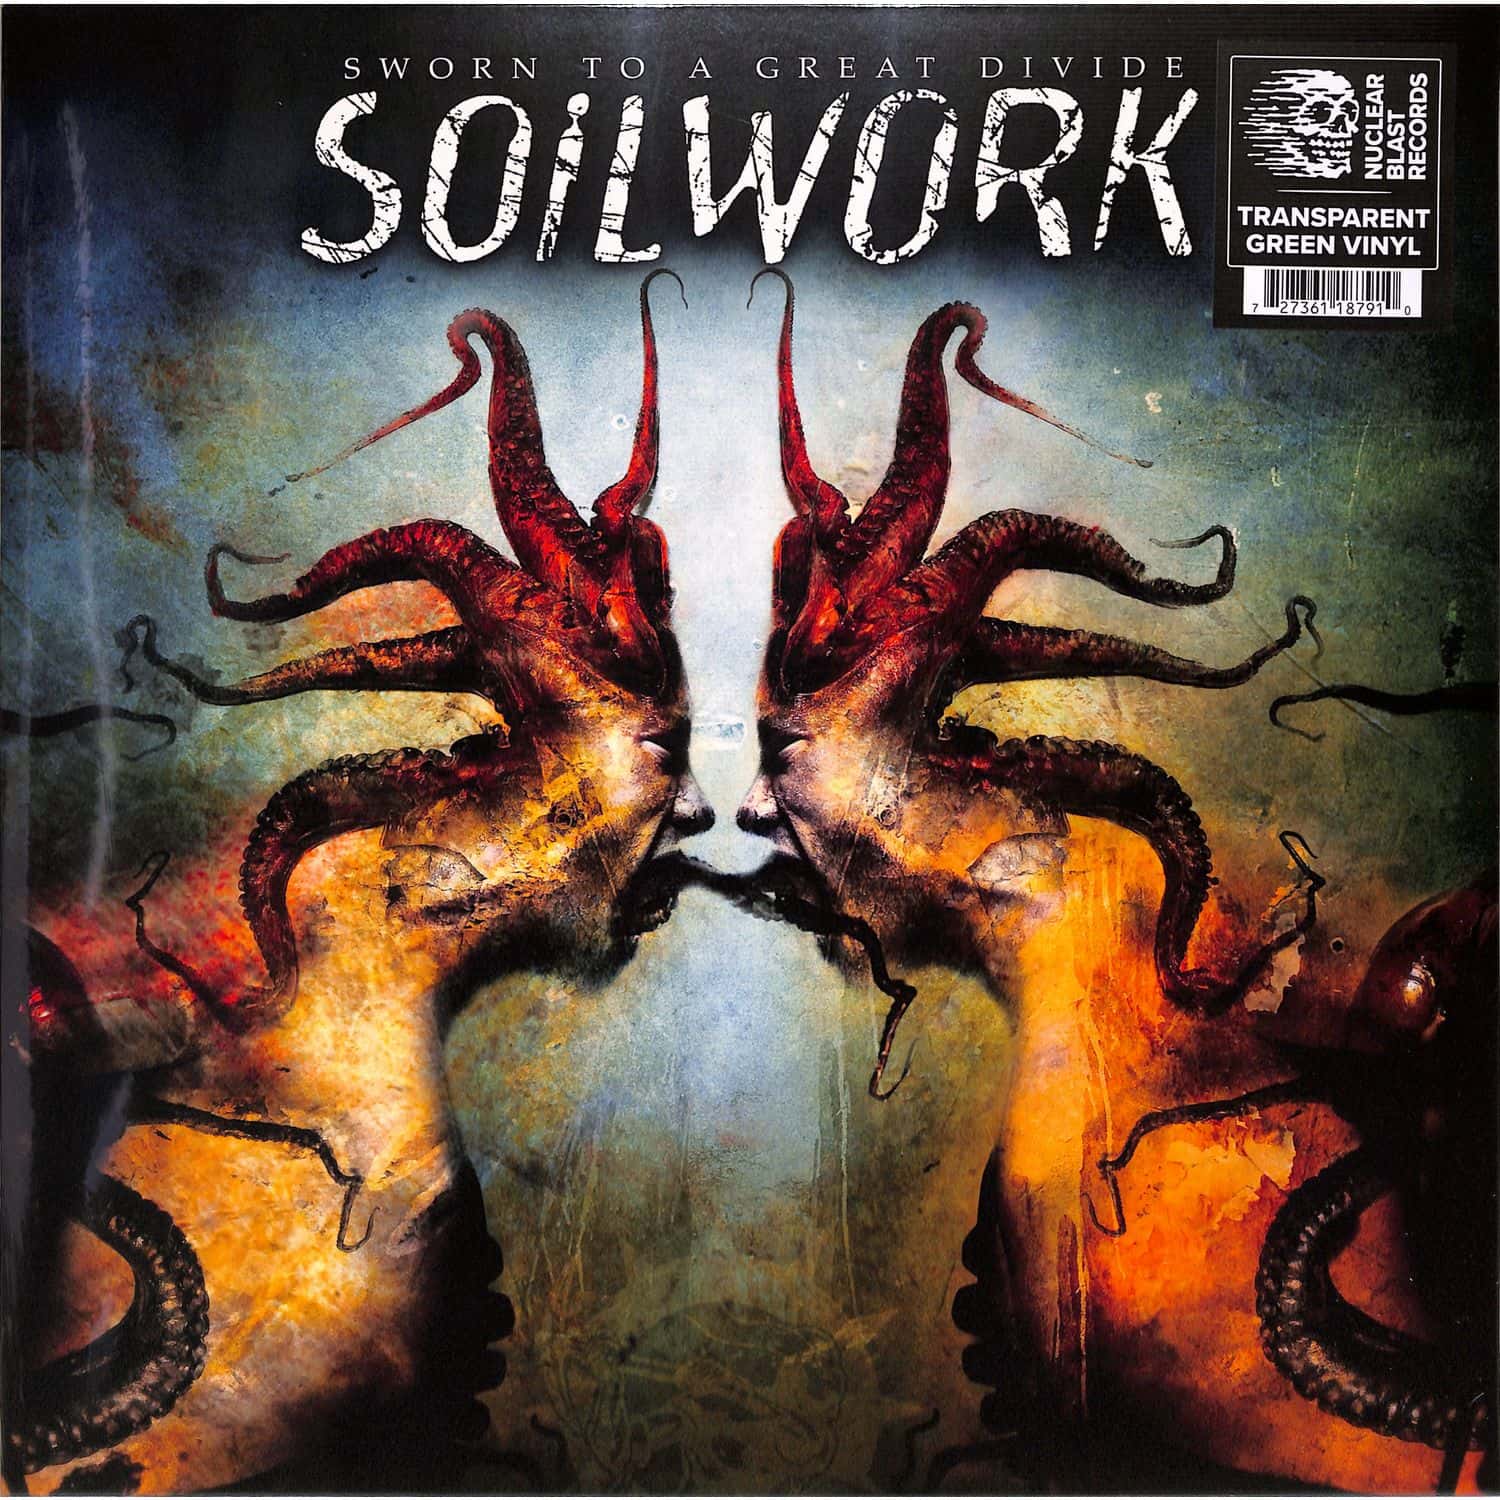 Soilwork - SWORN TO A GREAT DIVIDE 